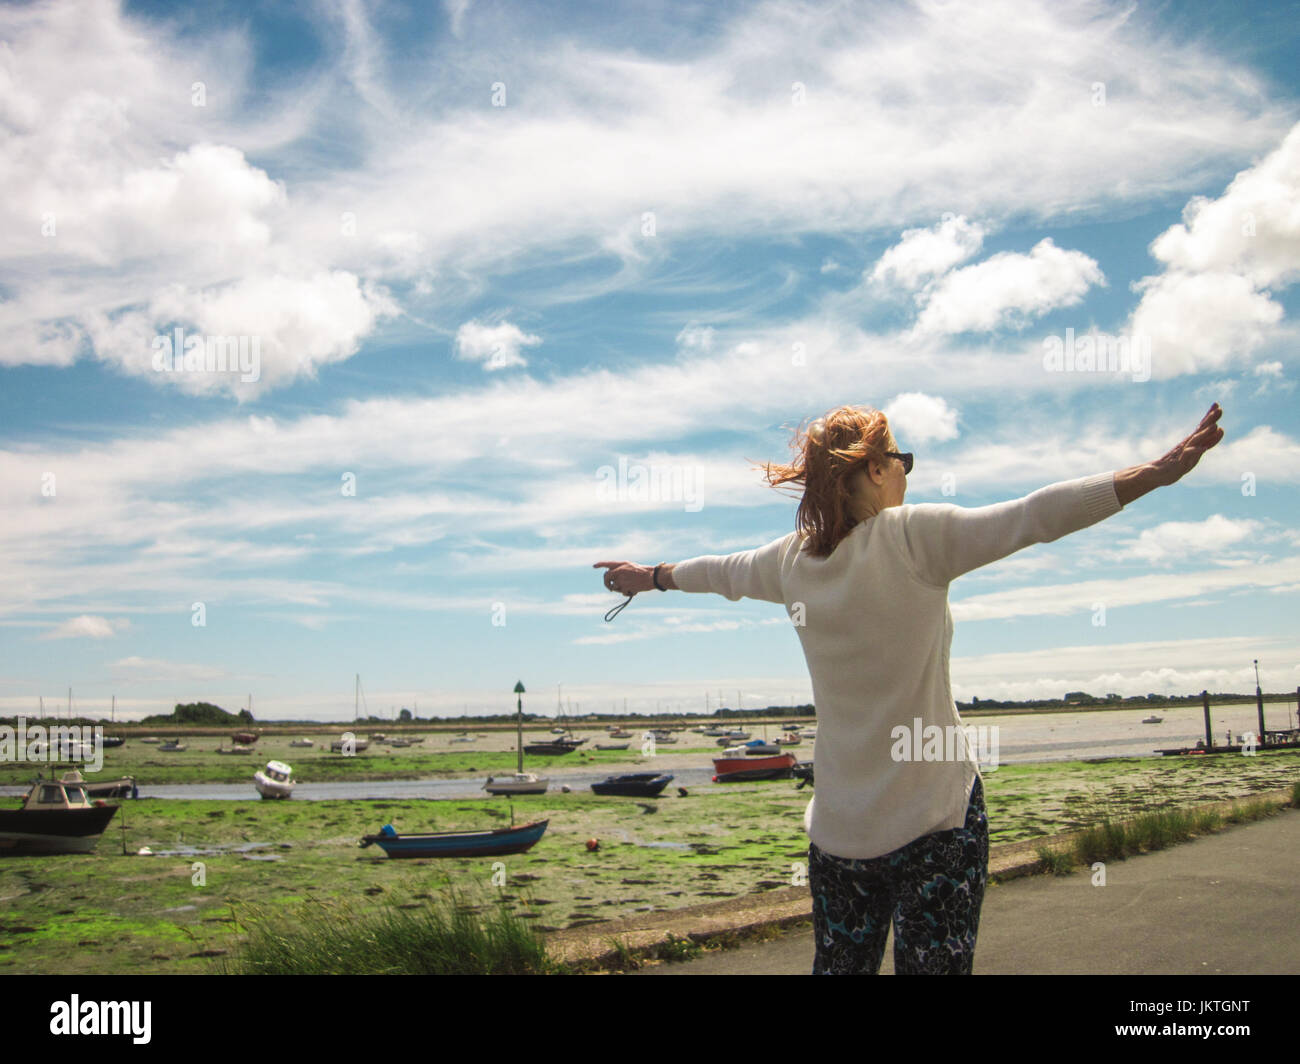 Rear shot of woman in white shirt gesturing with open arms at harbour view of small boats, on a cloudy summer's day in England. Space for text. Stock Photo